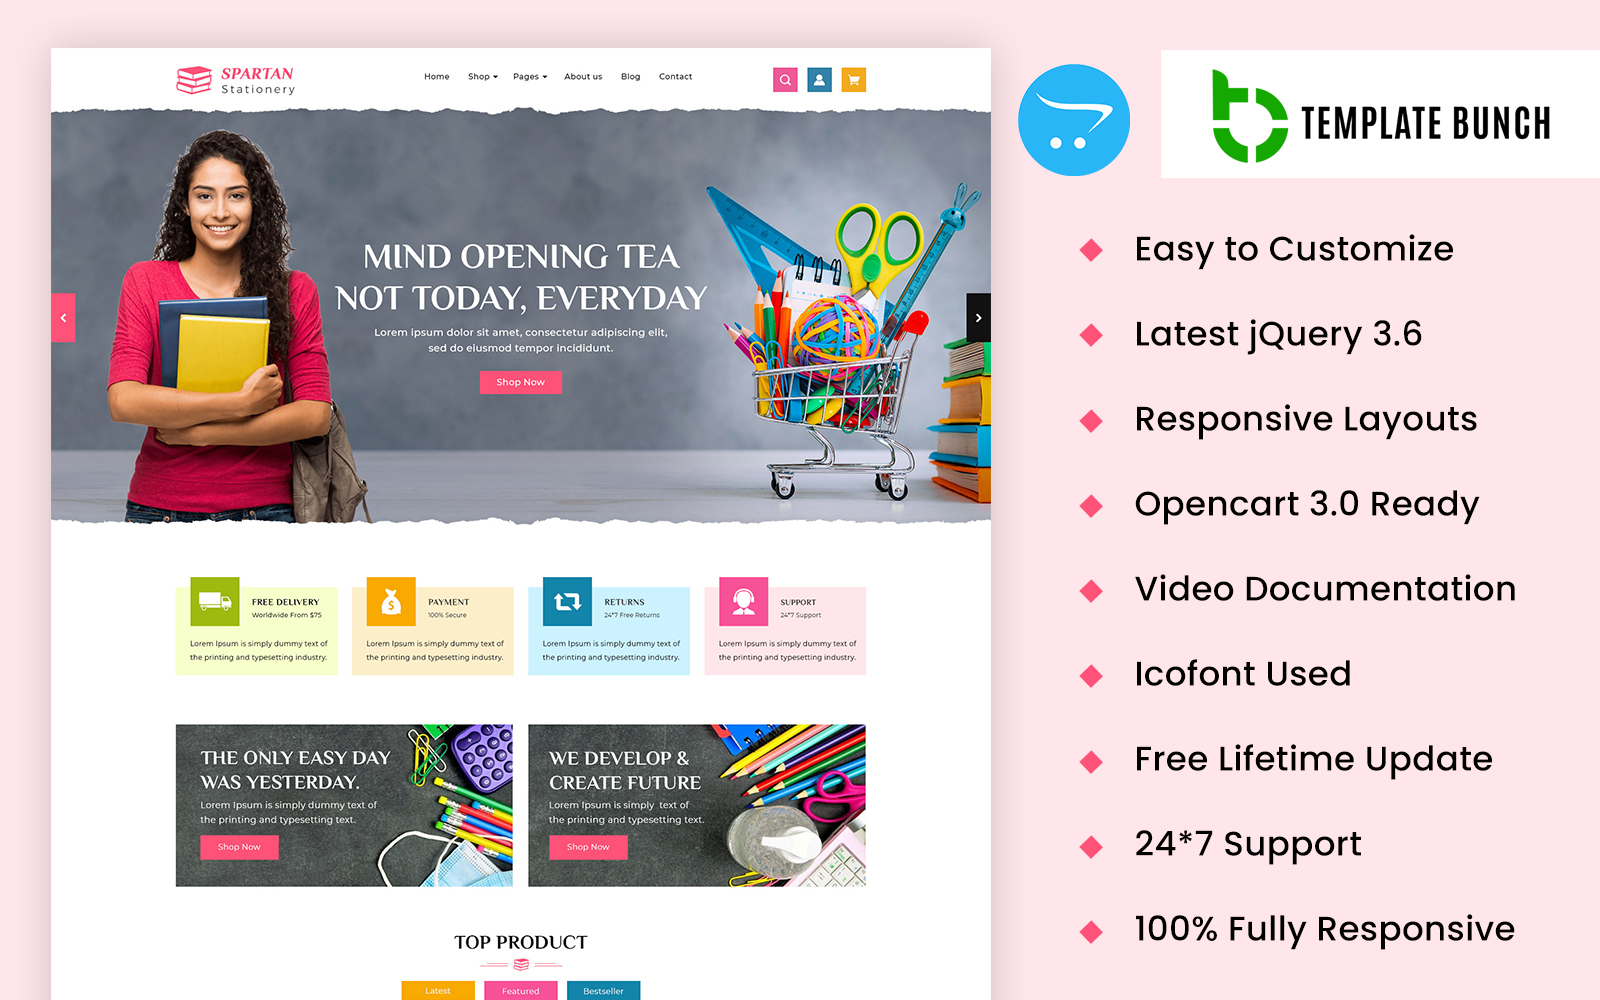 Spartan Stationery - Multipurpose eCommerce Template Opencart Theme